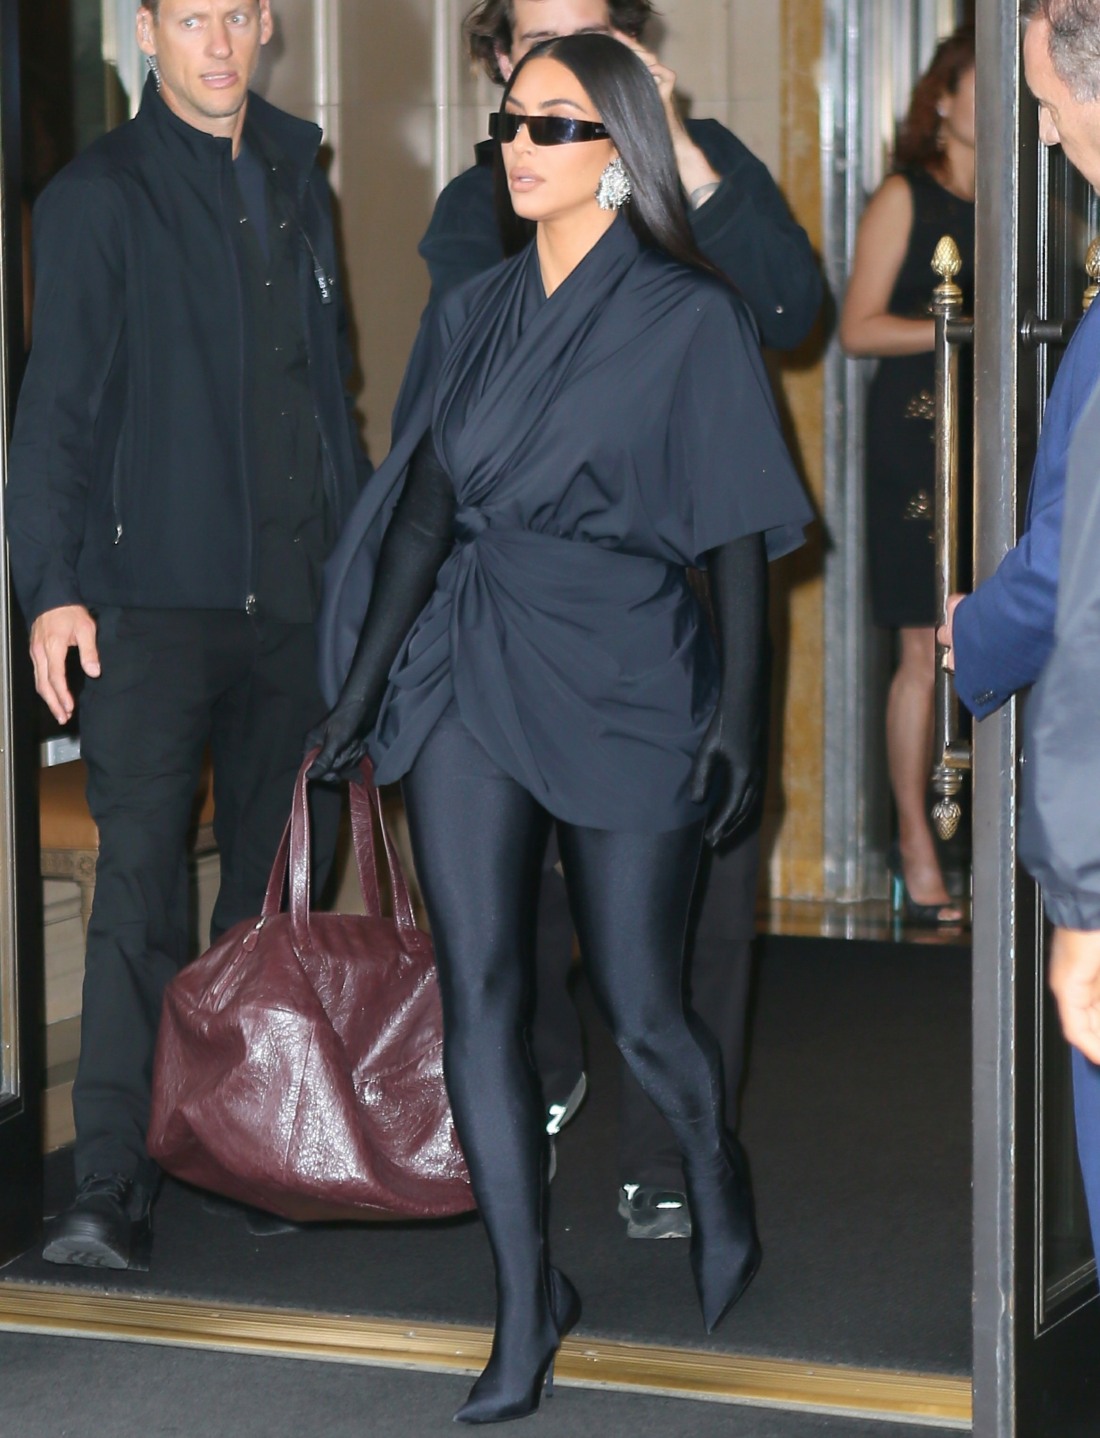 Kim Kardashian leaves the Ritz Carlton and heads to SNL for rehearsals